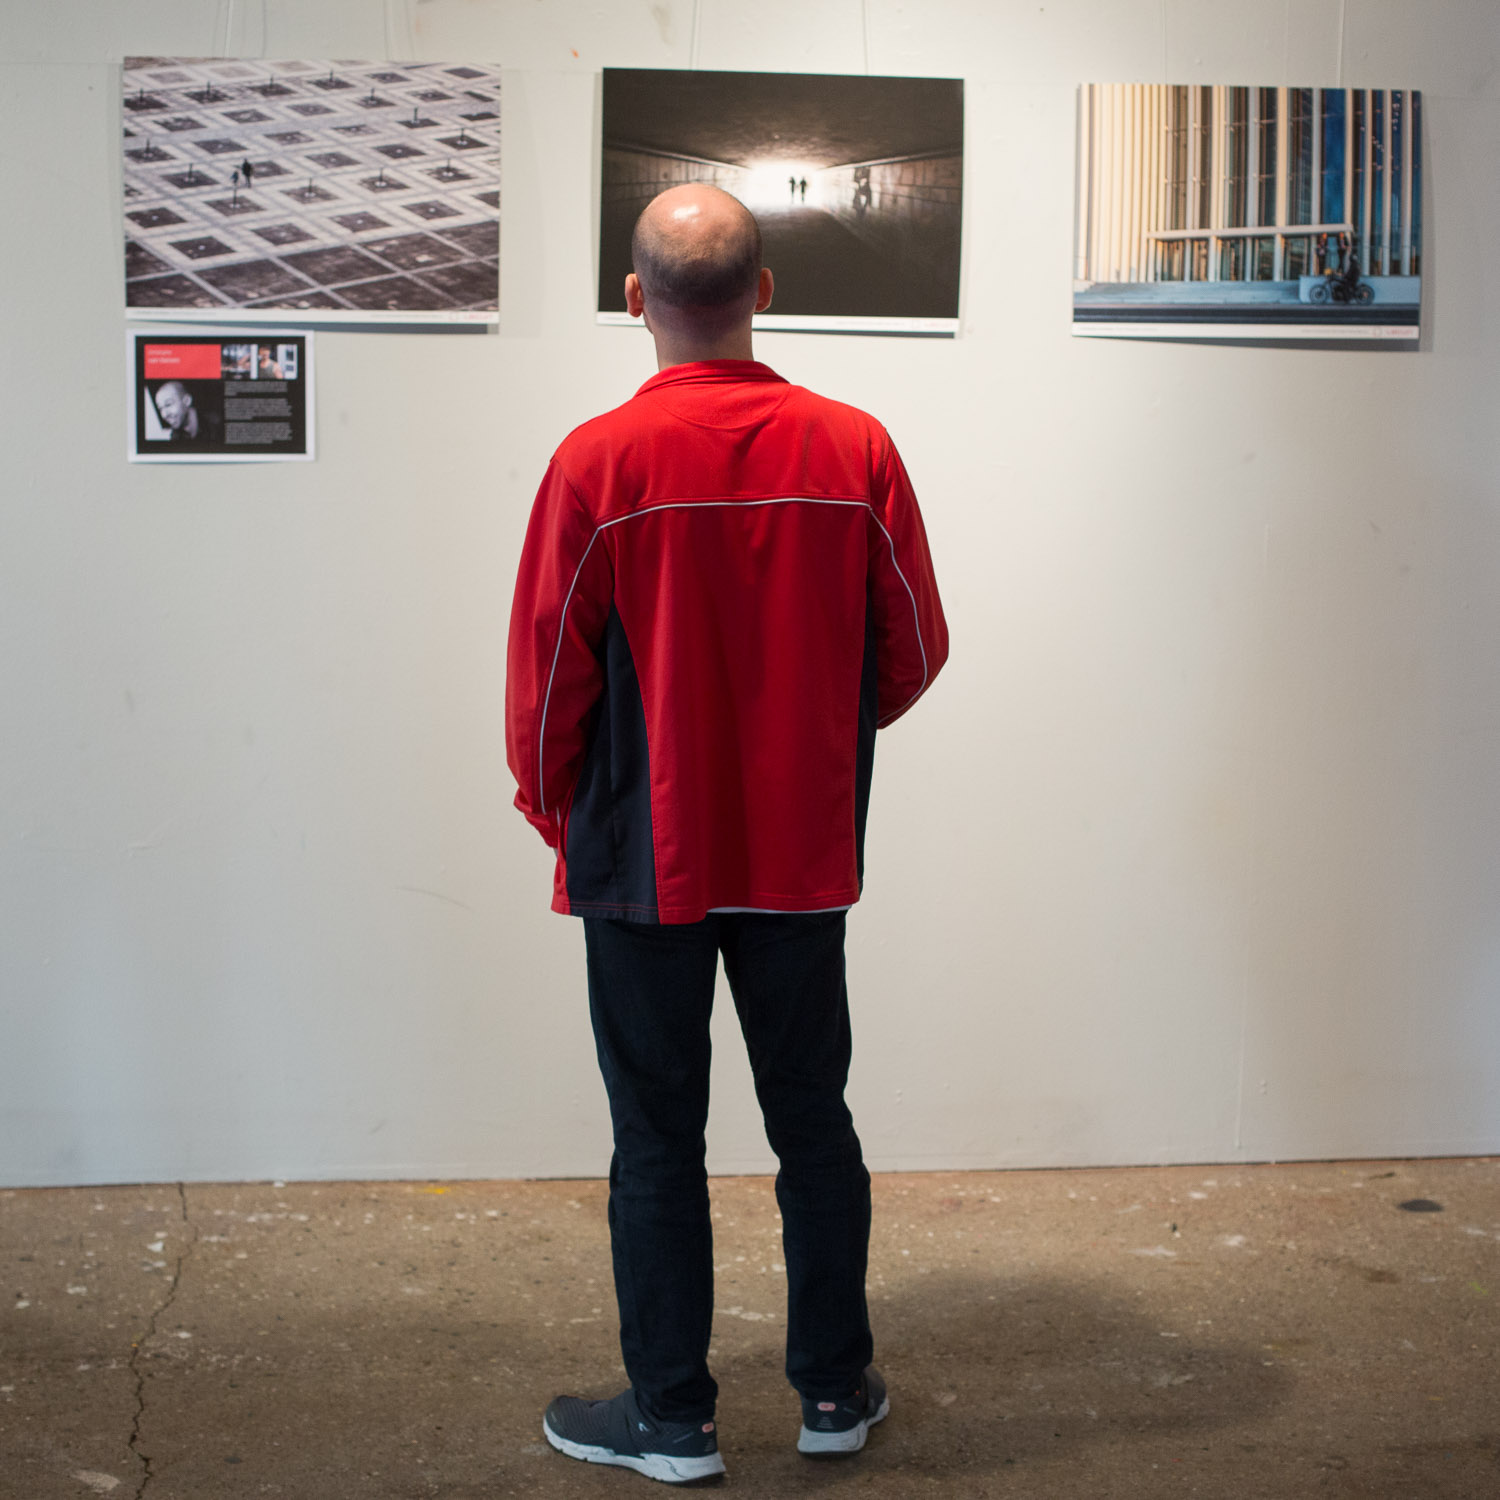 Collective exhibition by Street Photography Luxembourg at KUFA Kulturfabrik in Esch-sur-Alzette